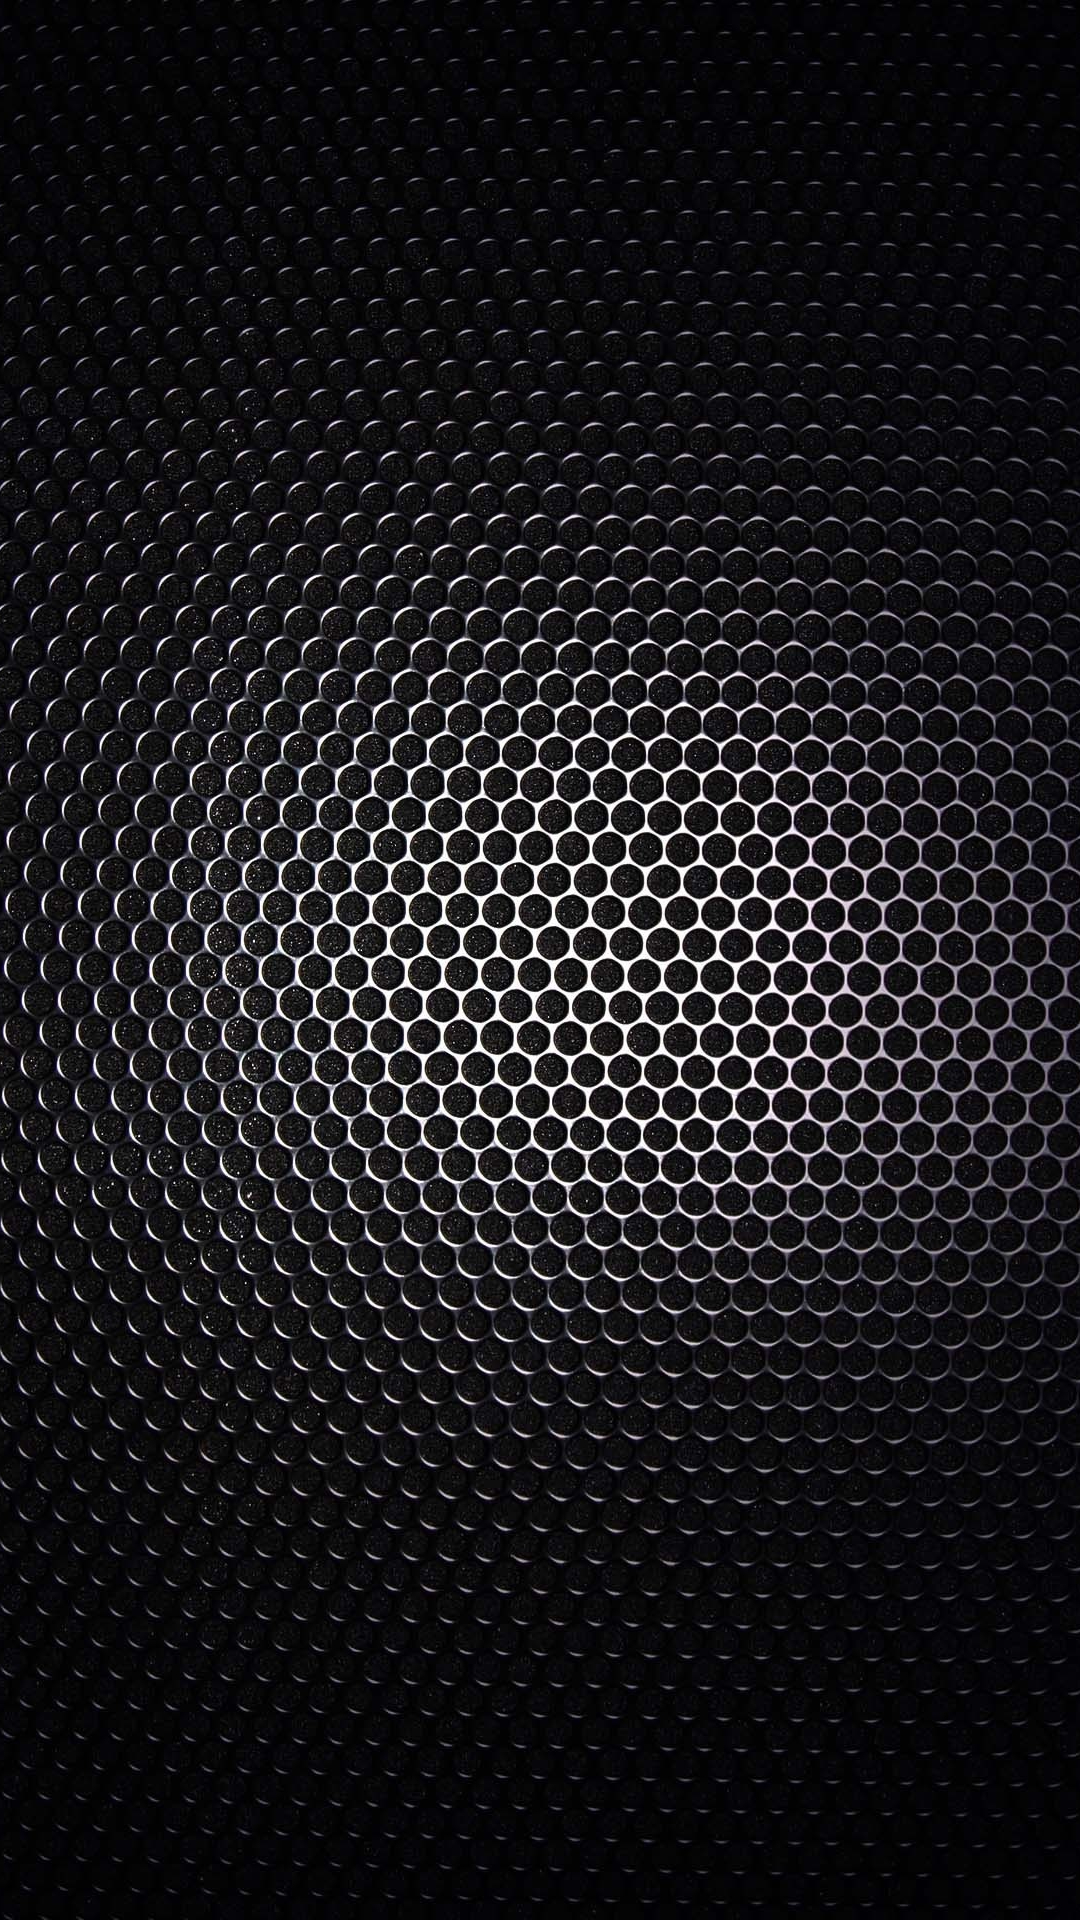 Galaxy S4 Wallpaper with Black metal grid design in 1080x1920 resolution